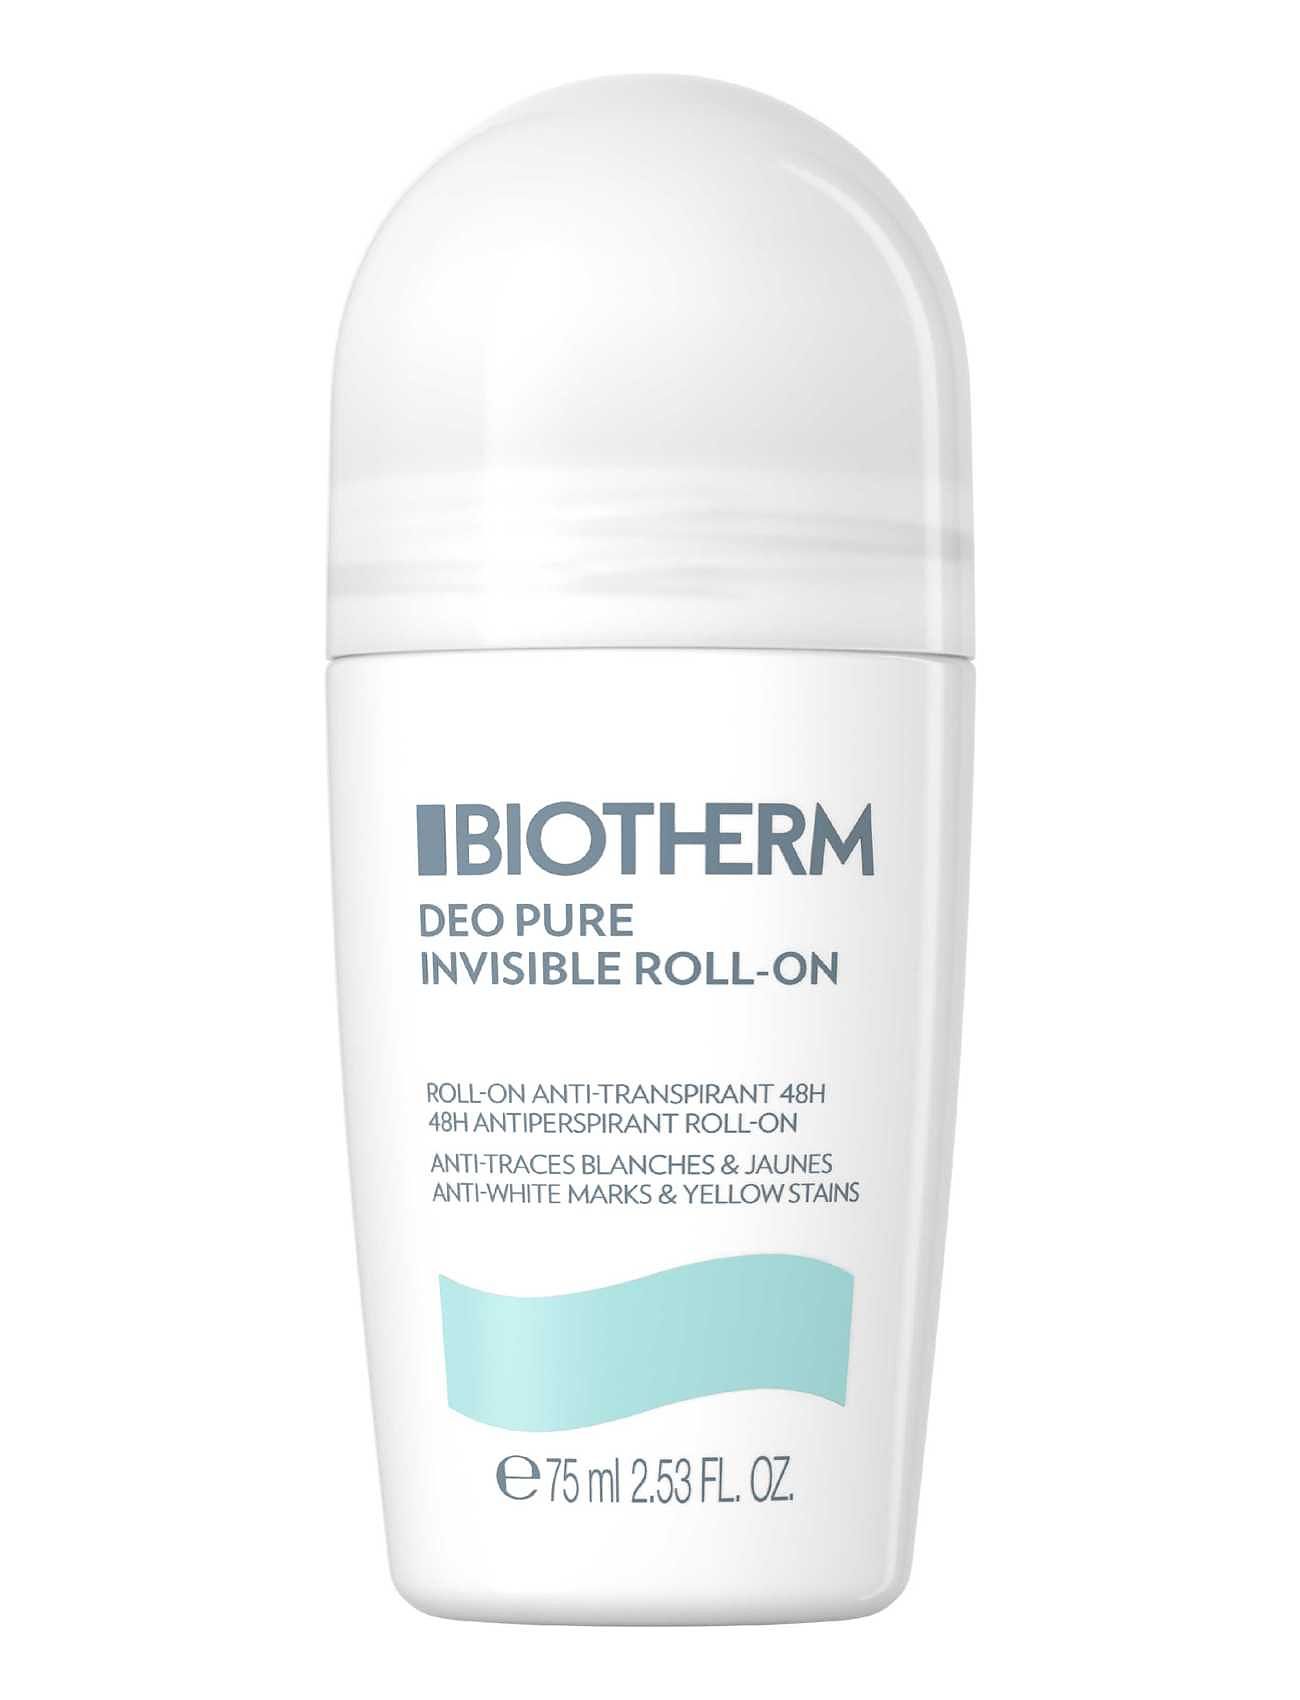 Biotherm "Deo Pure Invisible Roll-On 48H Deodorant Roll-on Nude Biotherm"